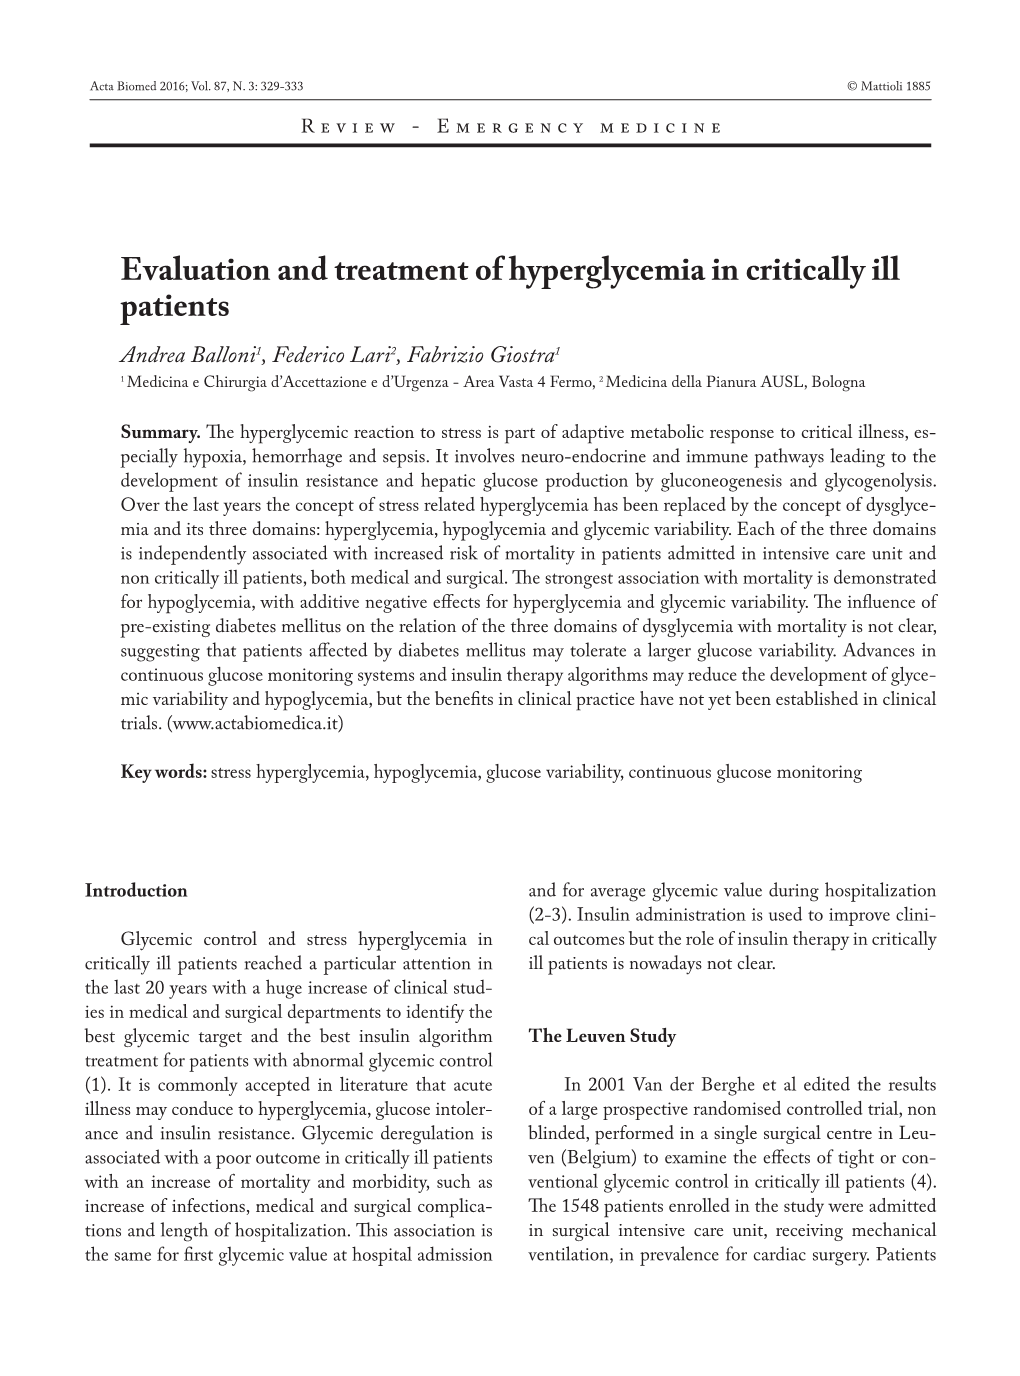 Evaluation and Treatment of Hyperglycemia in Critically Ill Patients